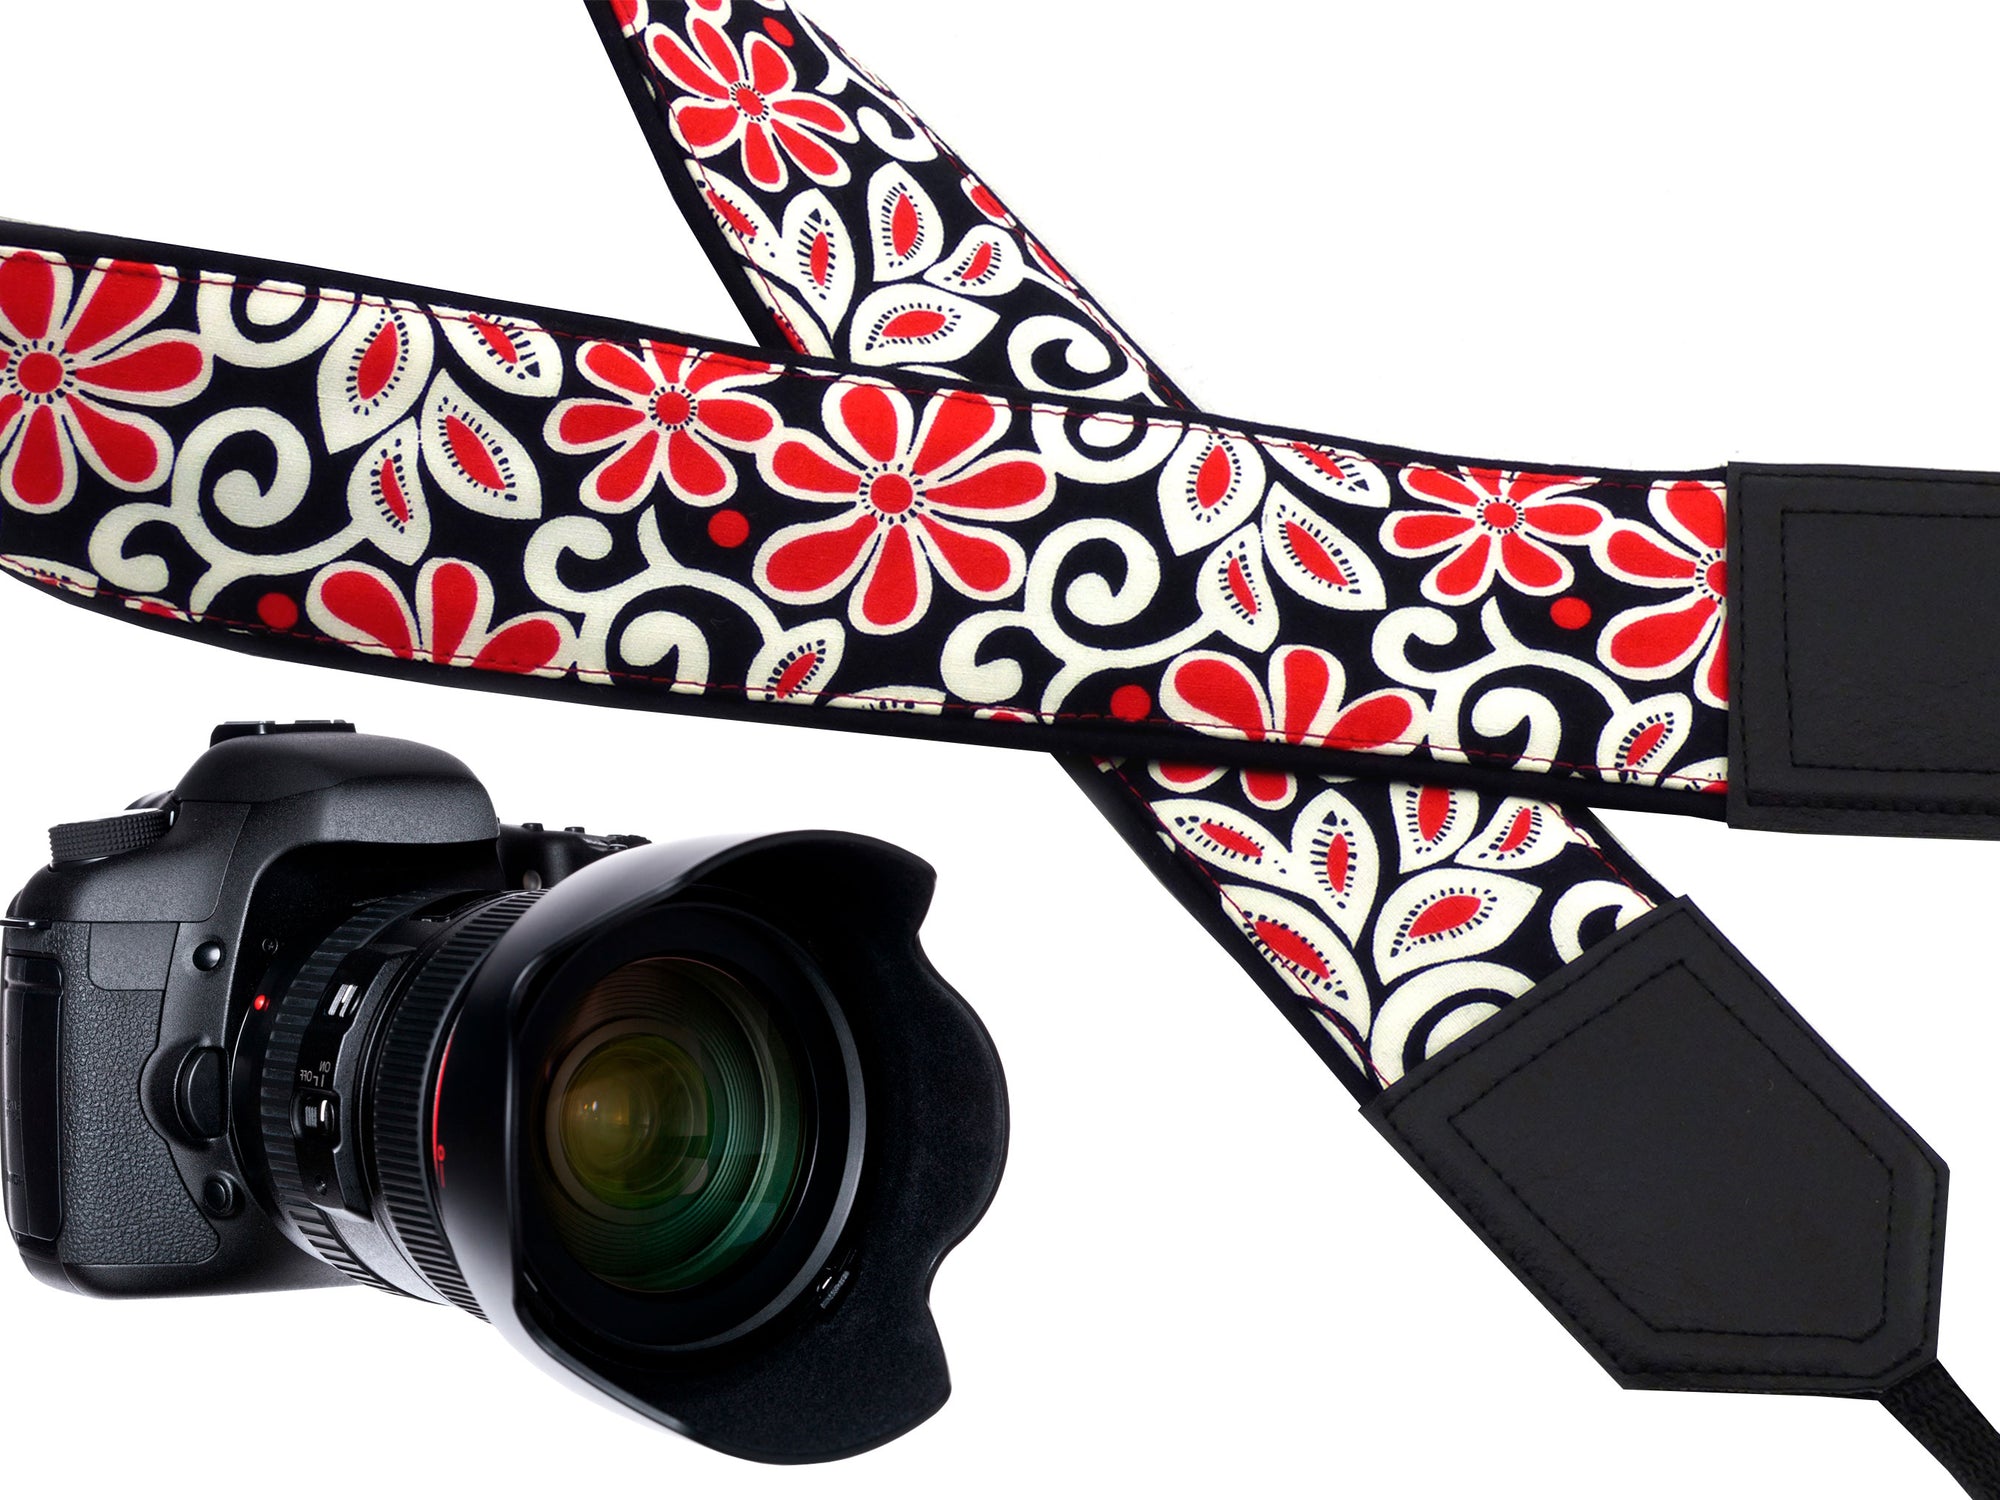 Padded camera strap with red and white flowers for DSLR SLR and mirrorless cameras.